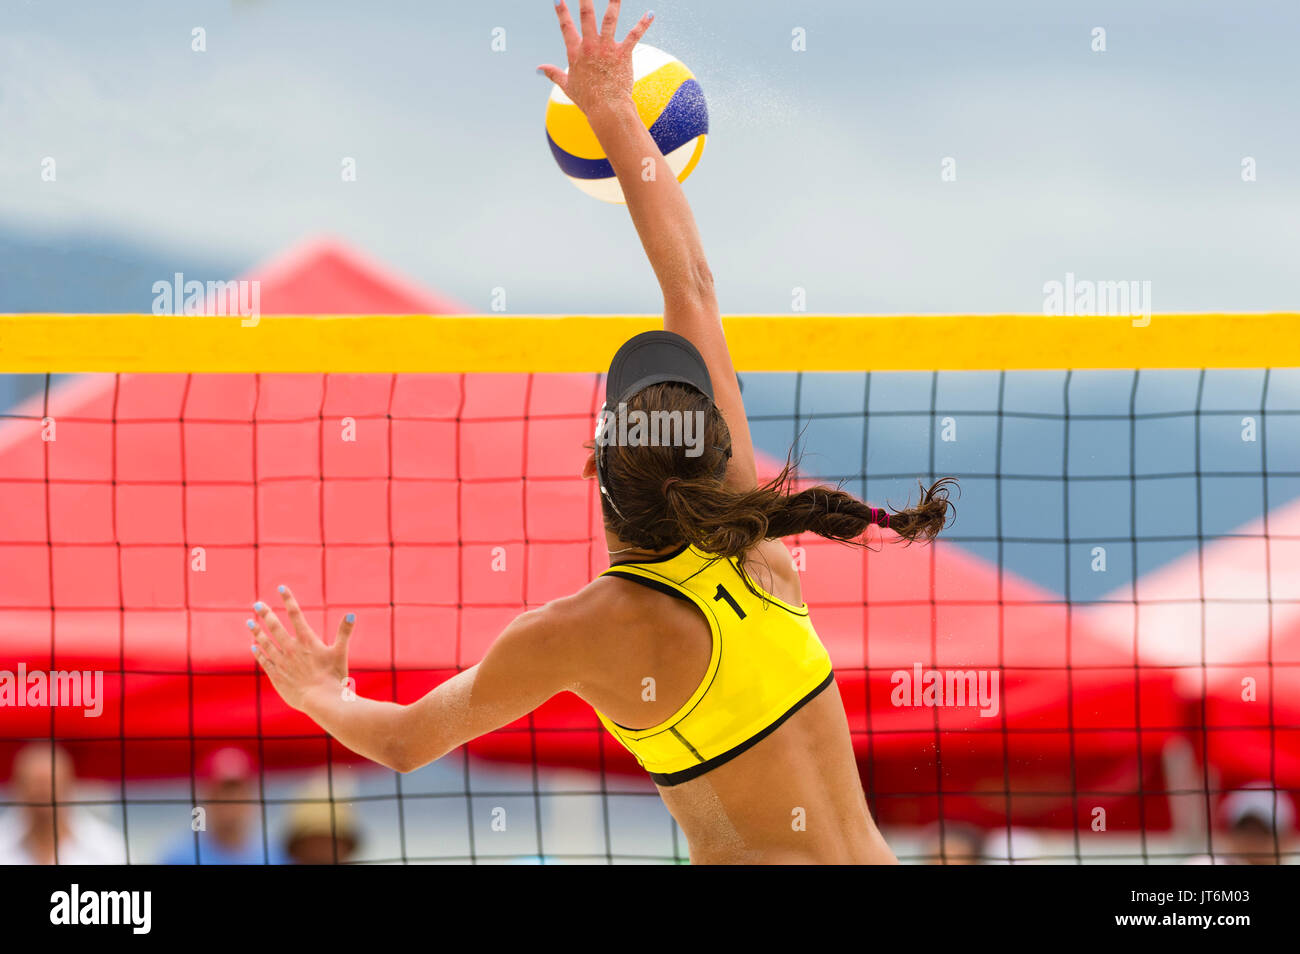 Volleyball player is a female beach volleyball player jumping at the net to spike the ball down. Stock Photo